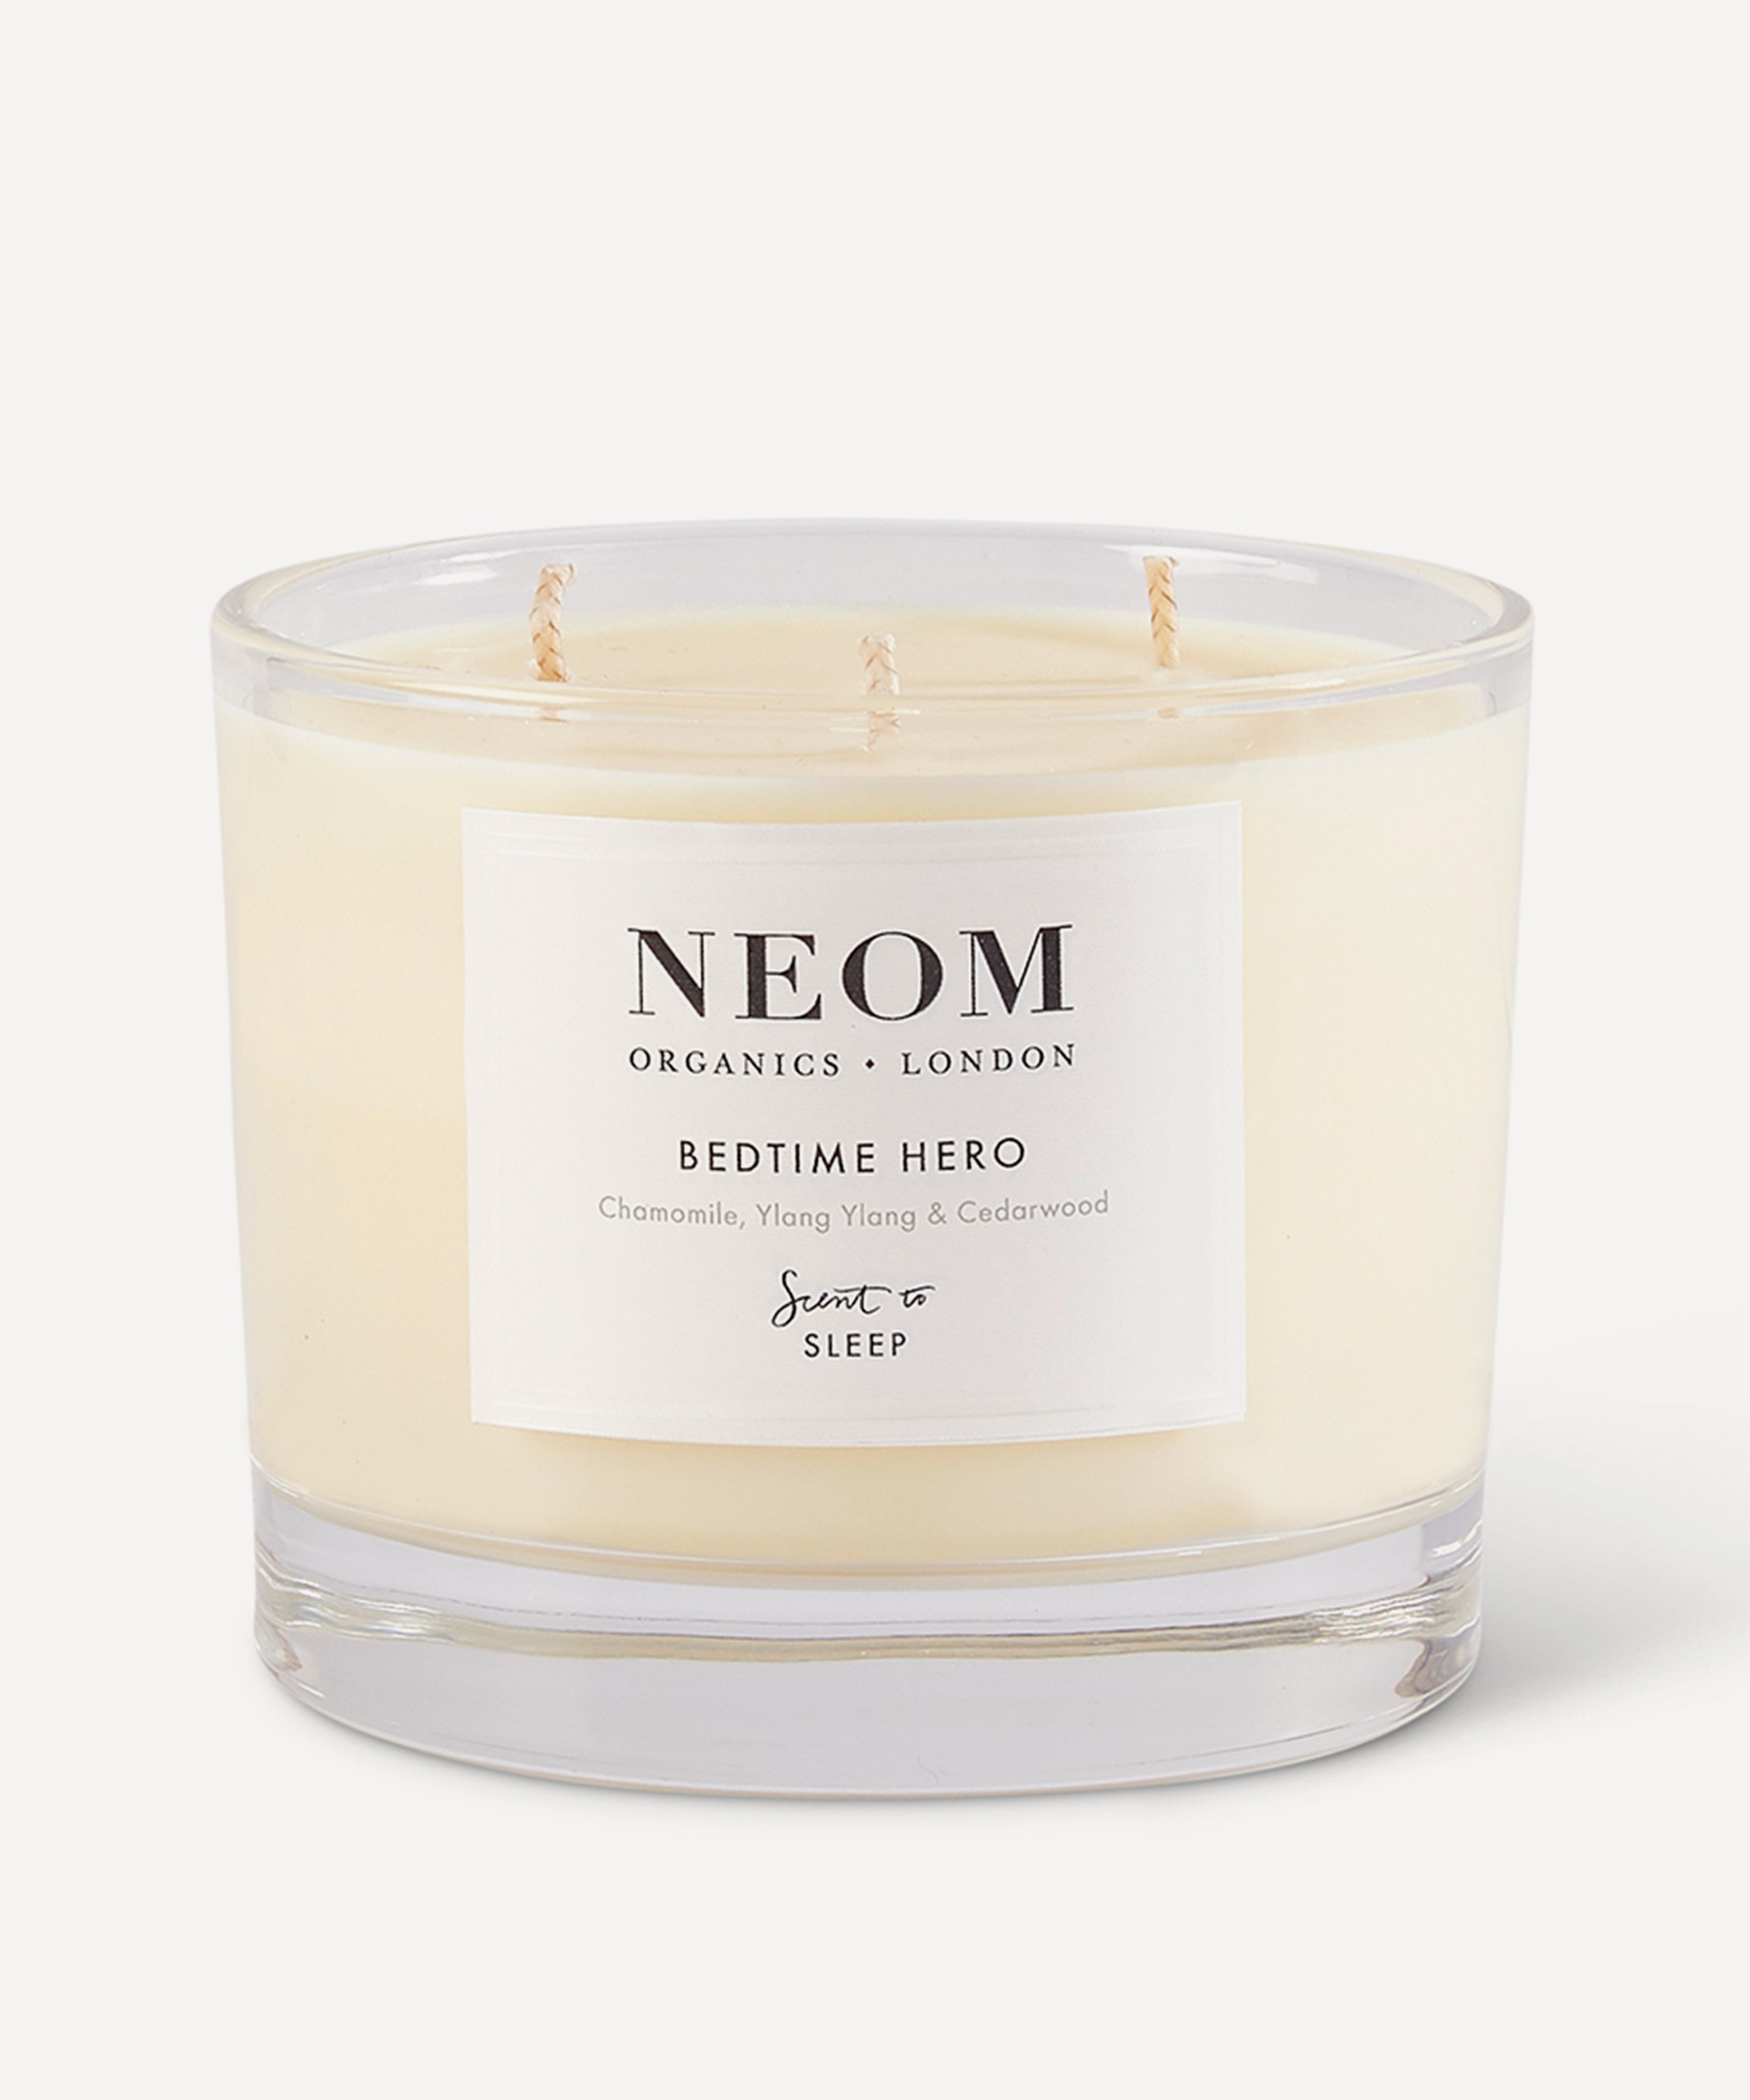 NEOM Organics - Bedtime Hero Three-Wick Scented Candle 420g image number 0